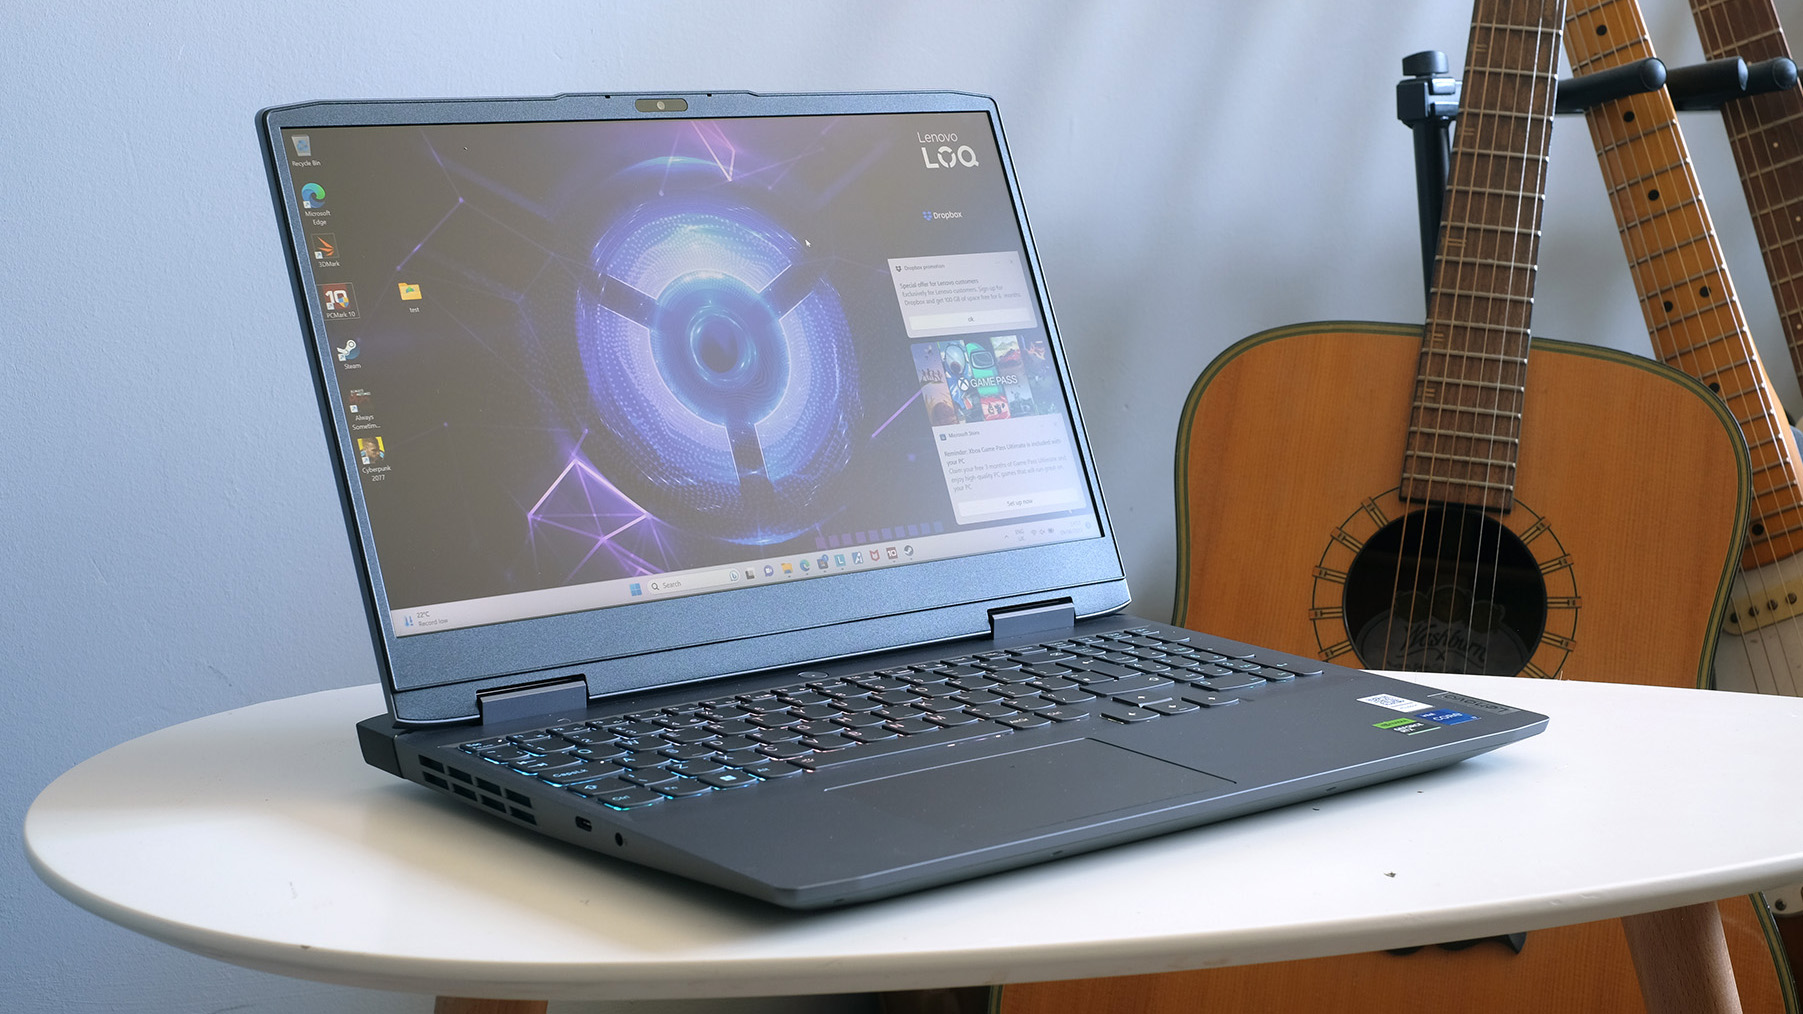 Lenovo LOQ 15 review: A gaming laptop for the masses